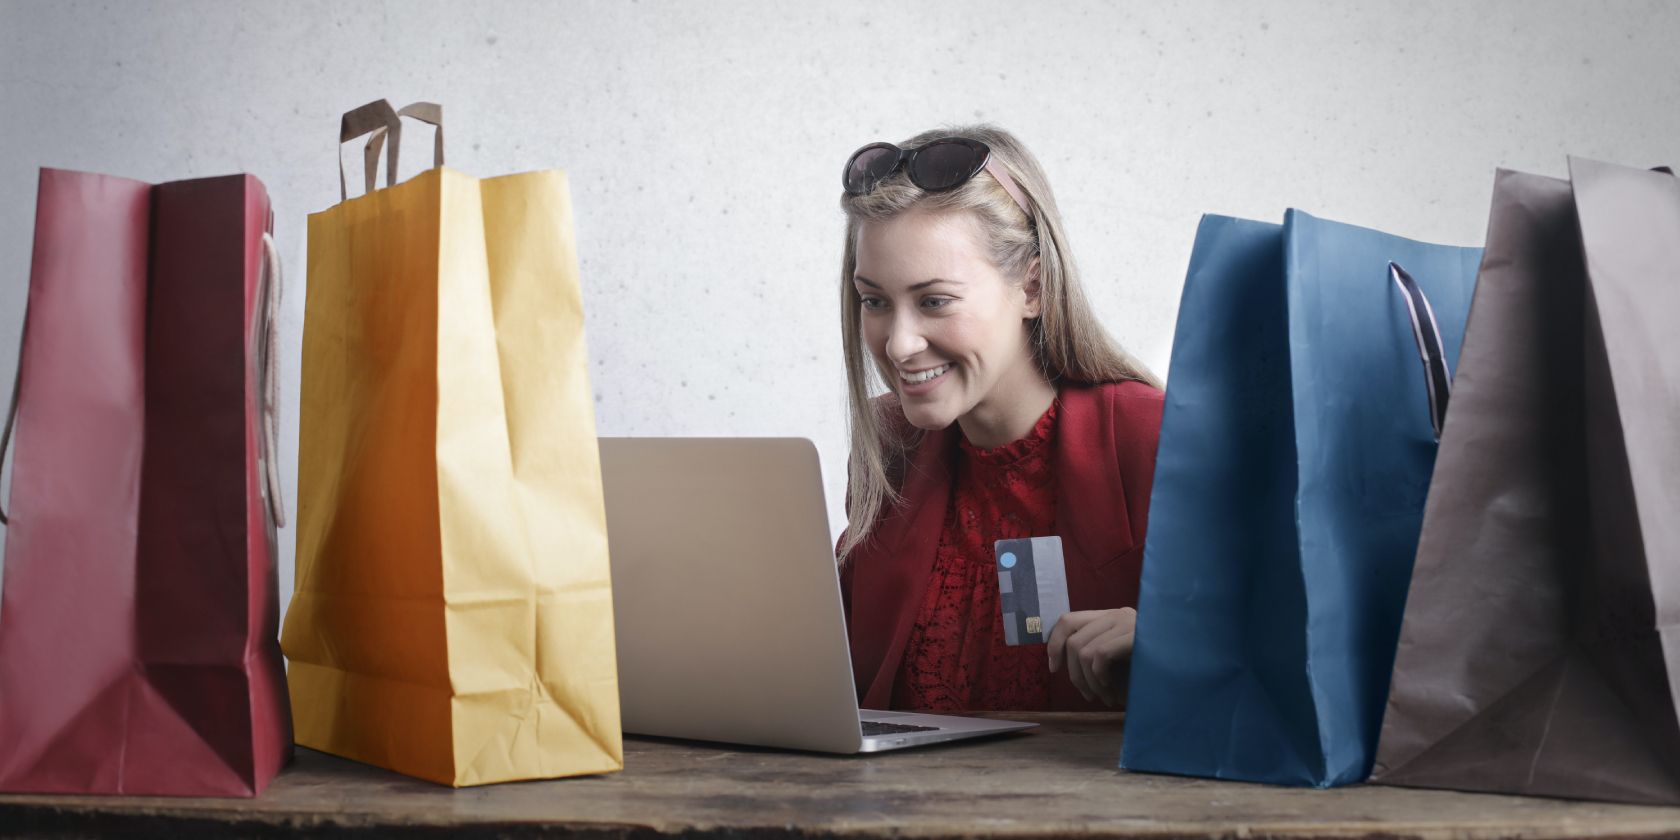 Woman shopping on her laptop, with shopping bags next to her